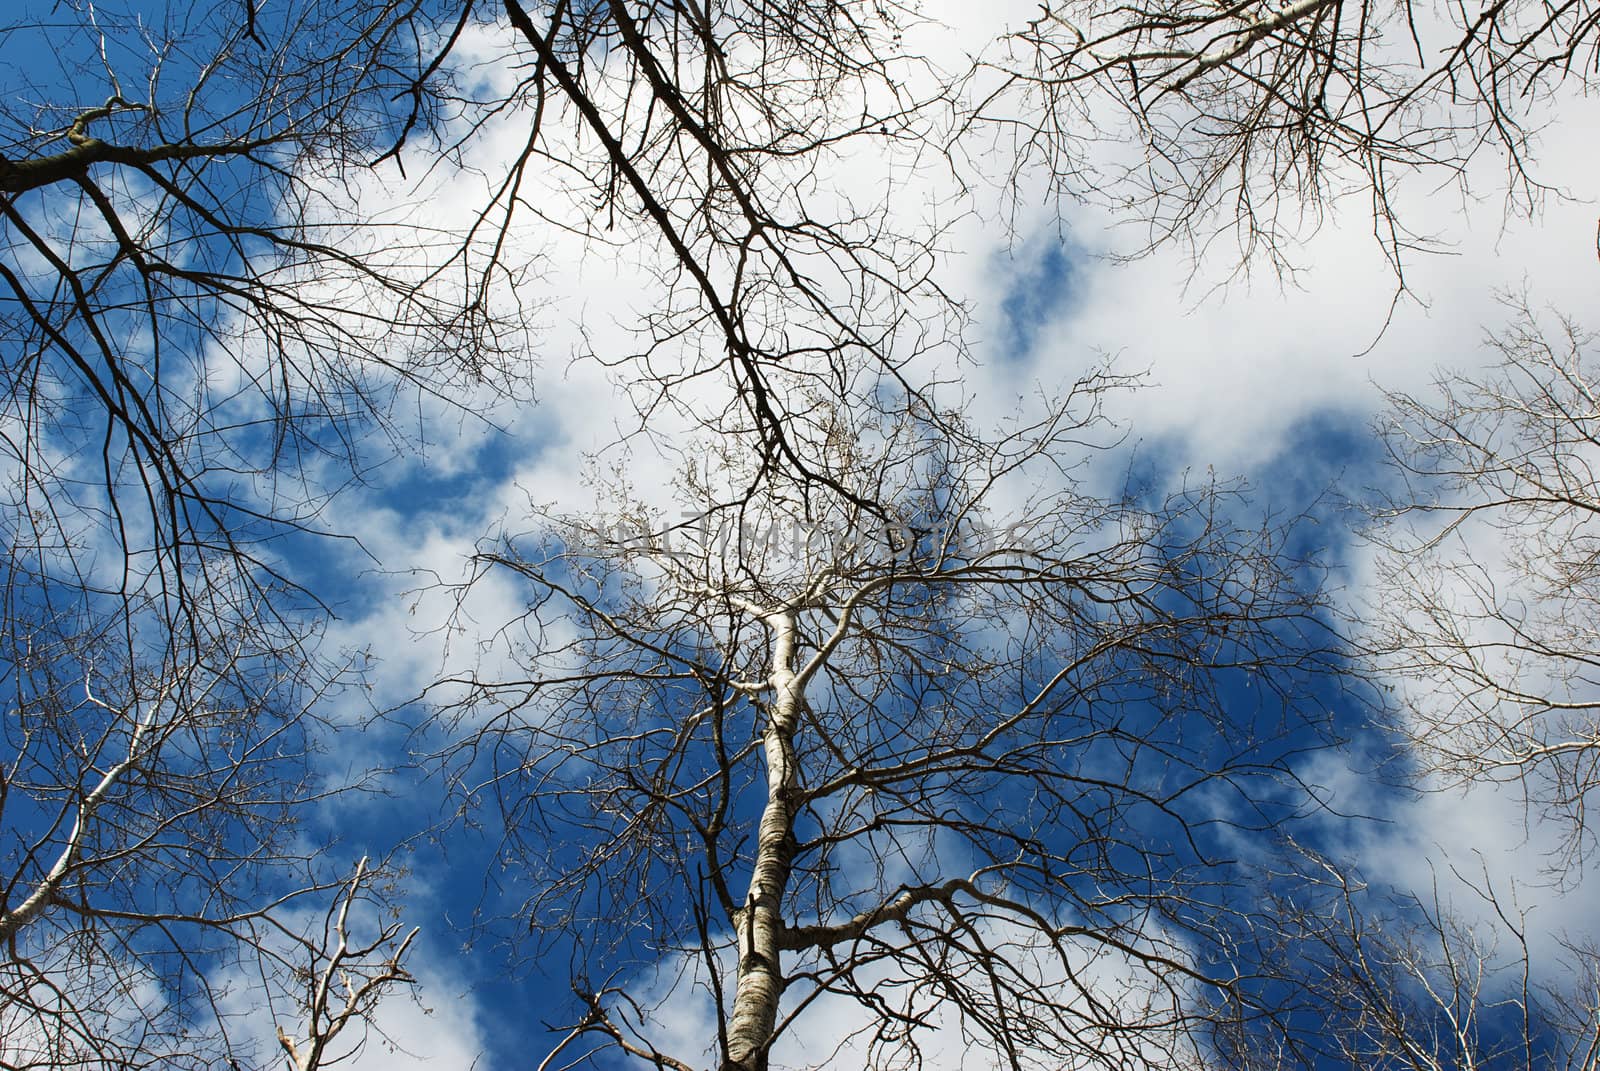 Sky and Birch Trees by chimmi